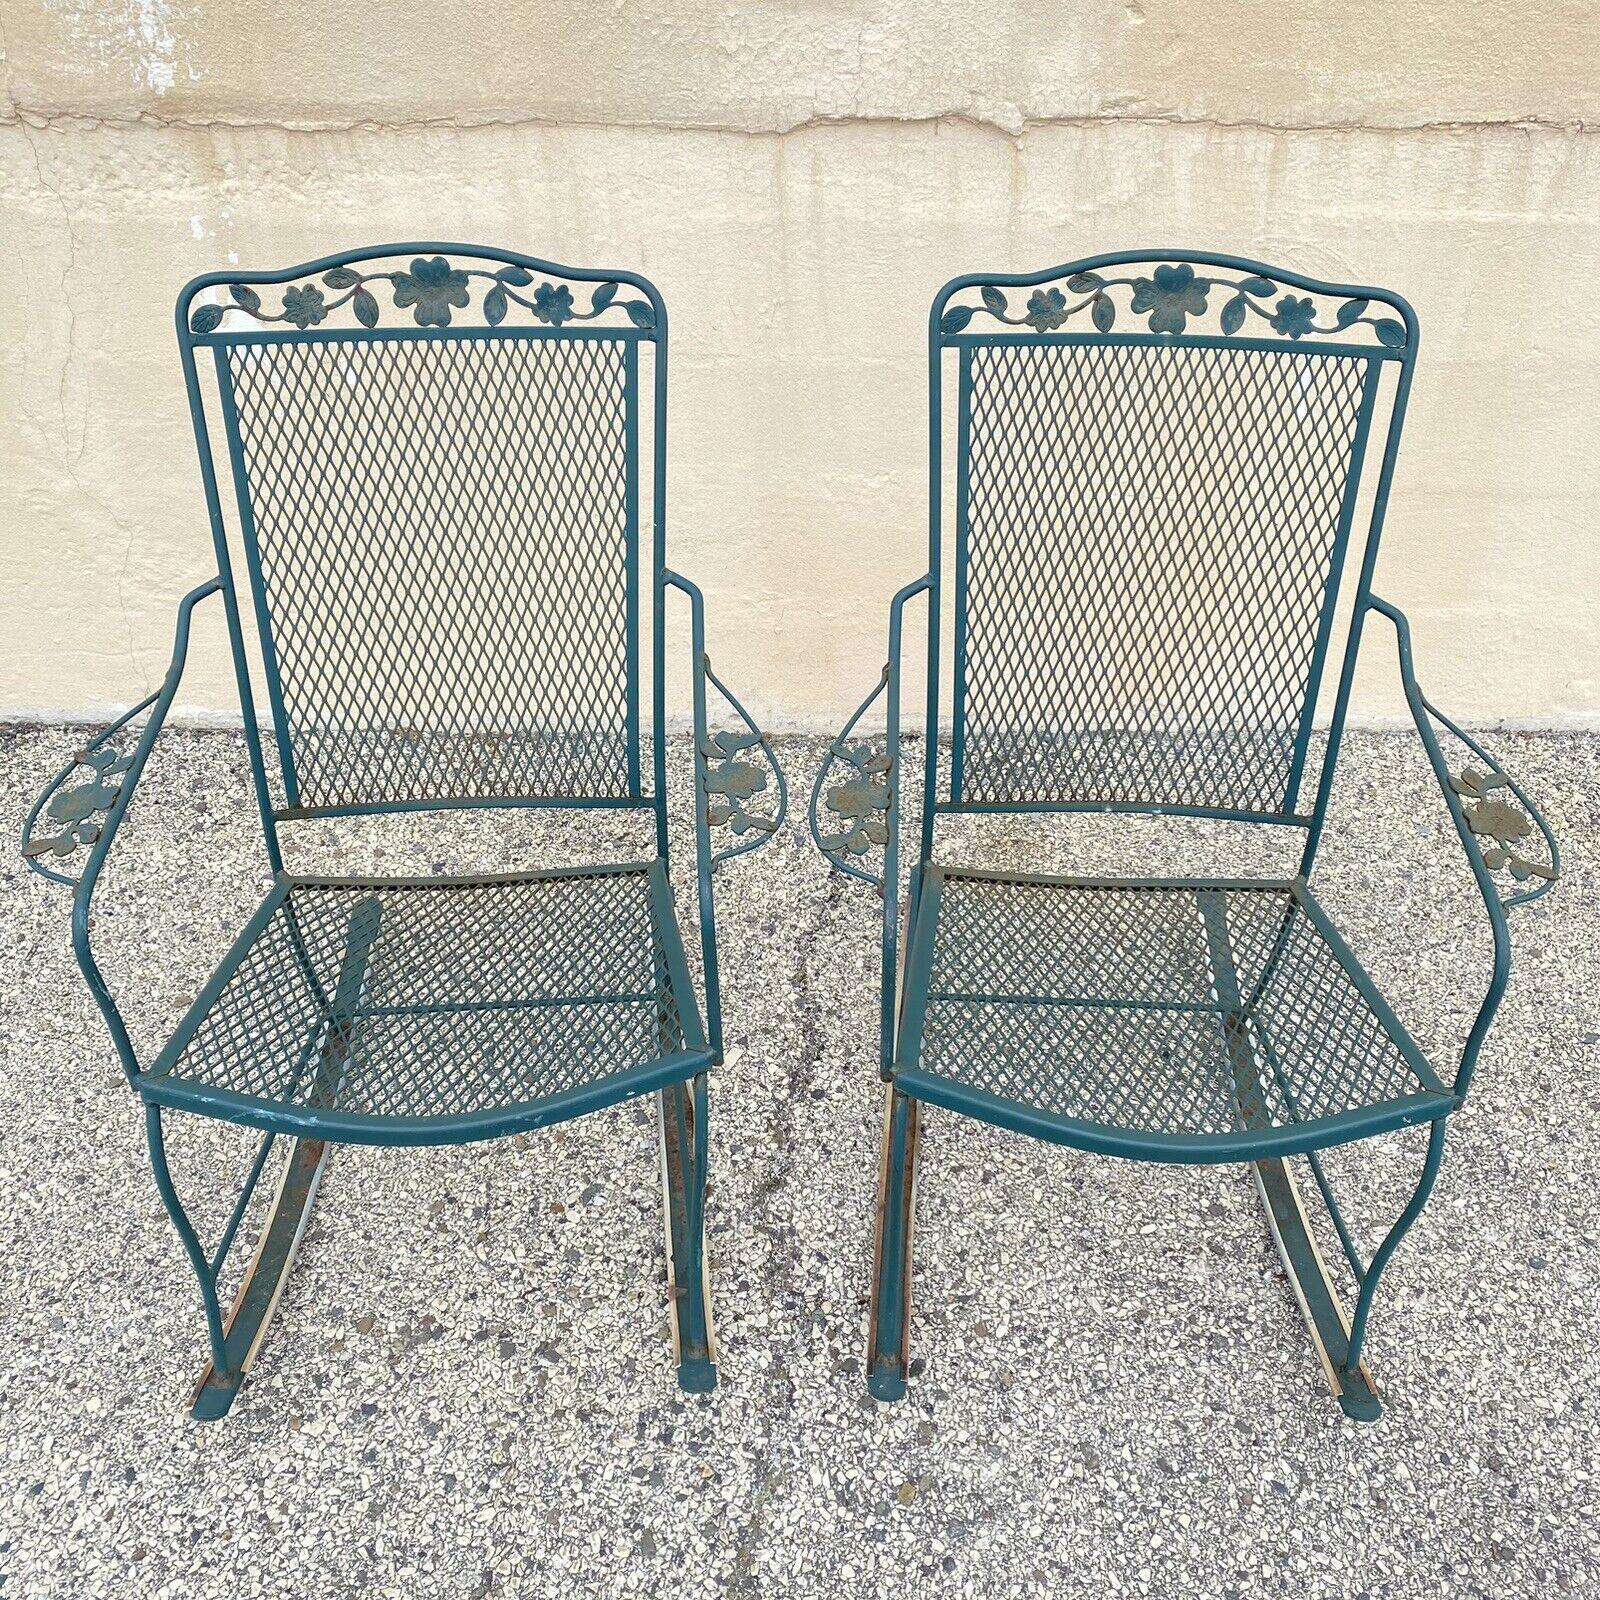 Vtg Wrought Iron Victorian Woodard Style Green Patio Garden Rocking Chair - Pair For Sale 7